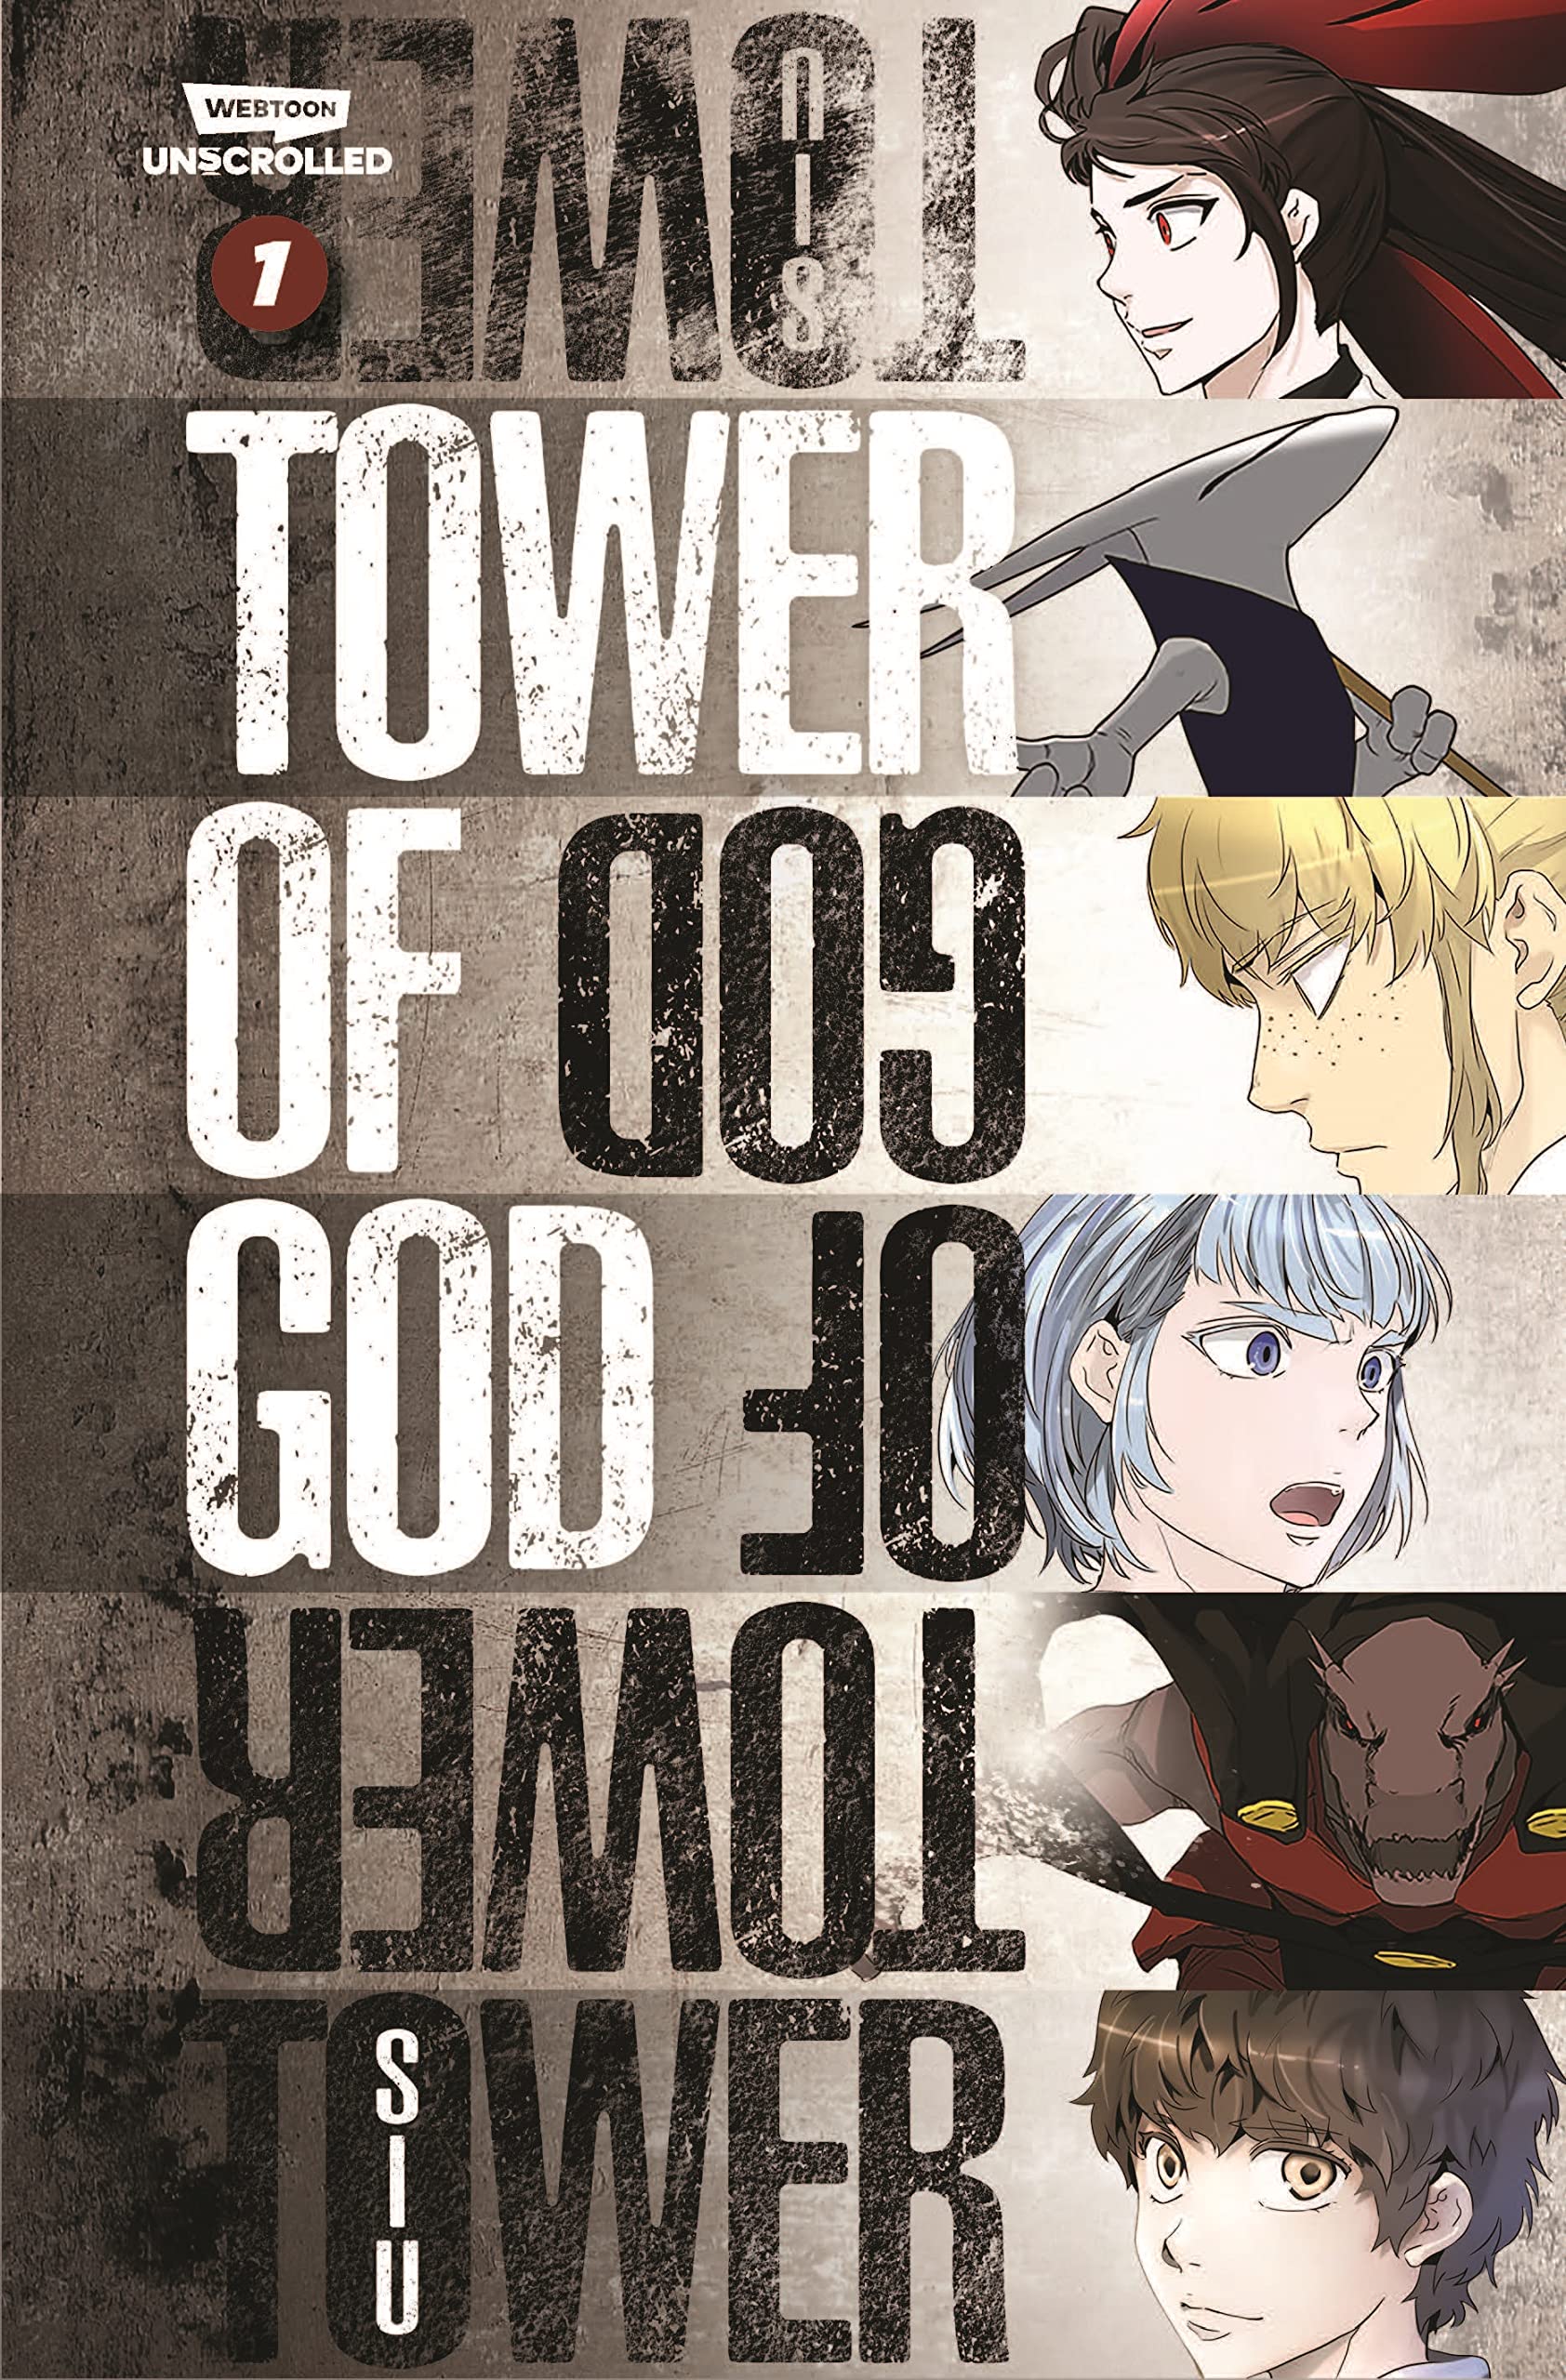 Tower of God - Episode 1 Review, Webtoon Anime is Here